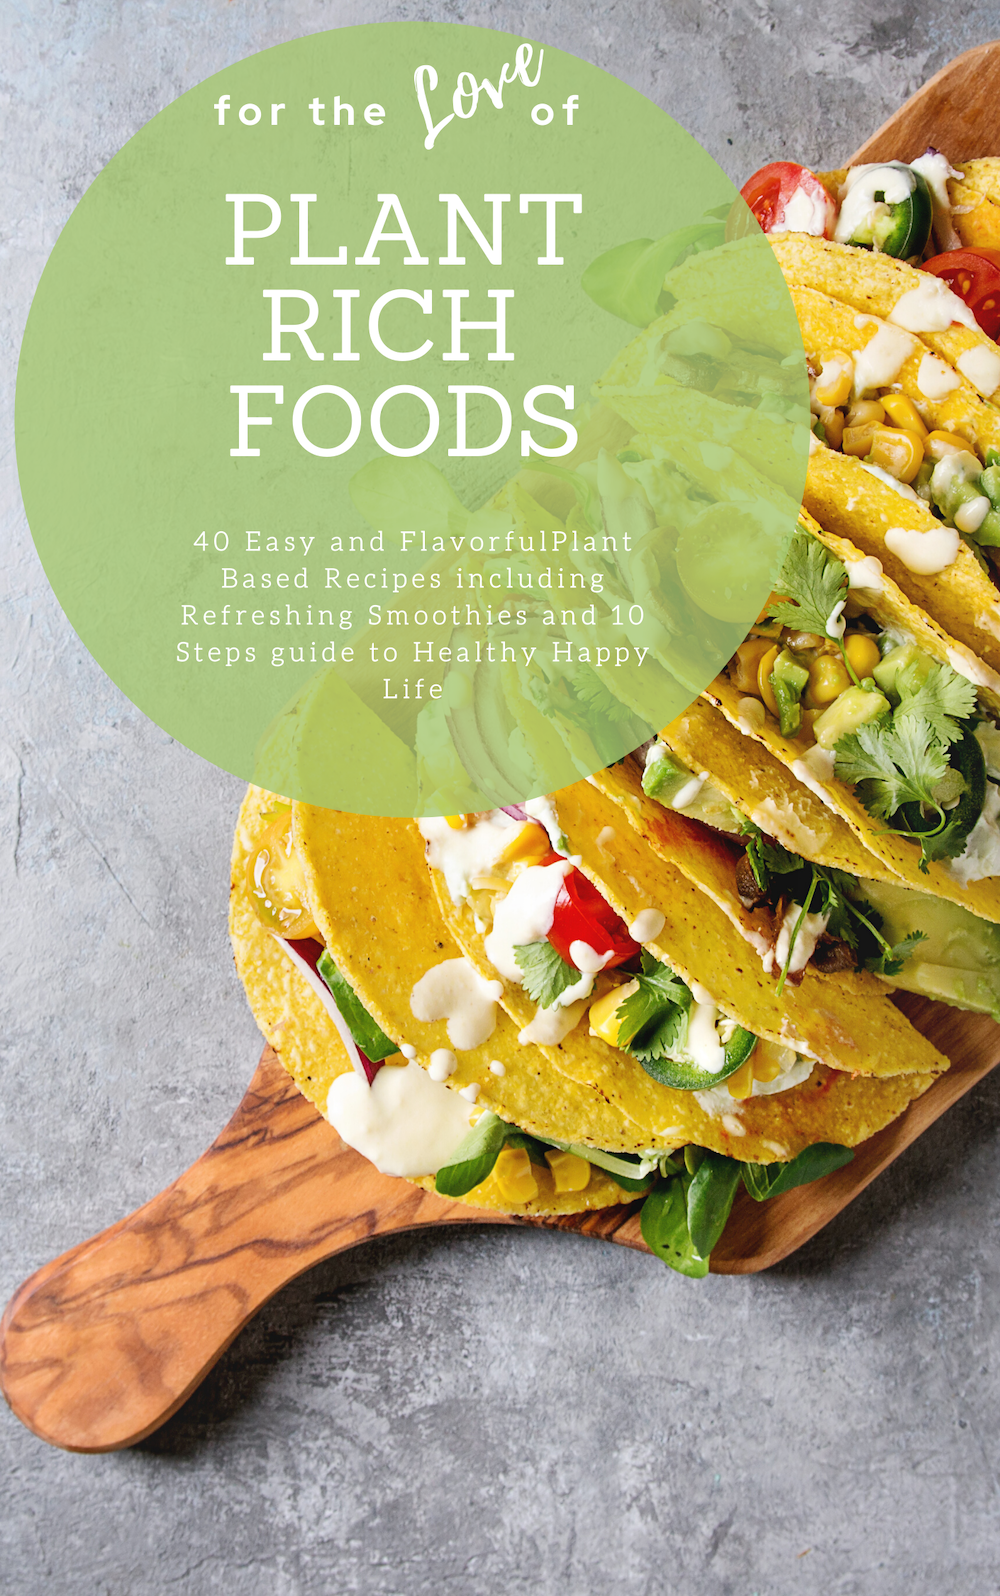 plant rich foods ebook cover 2